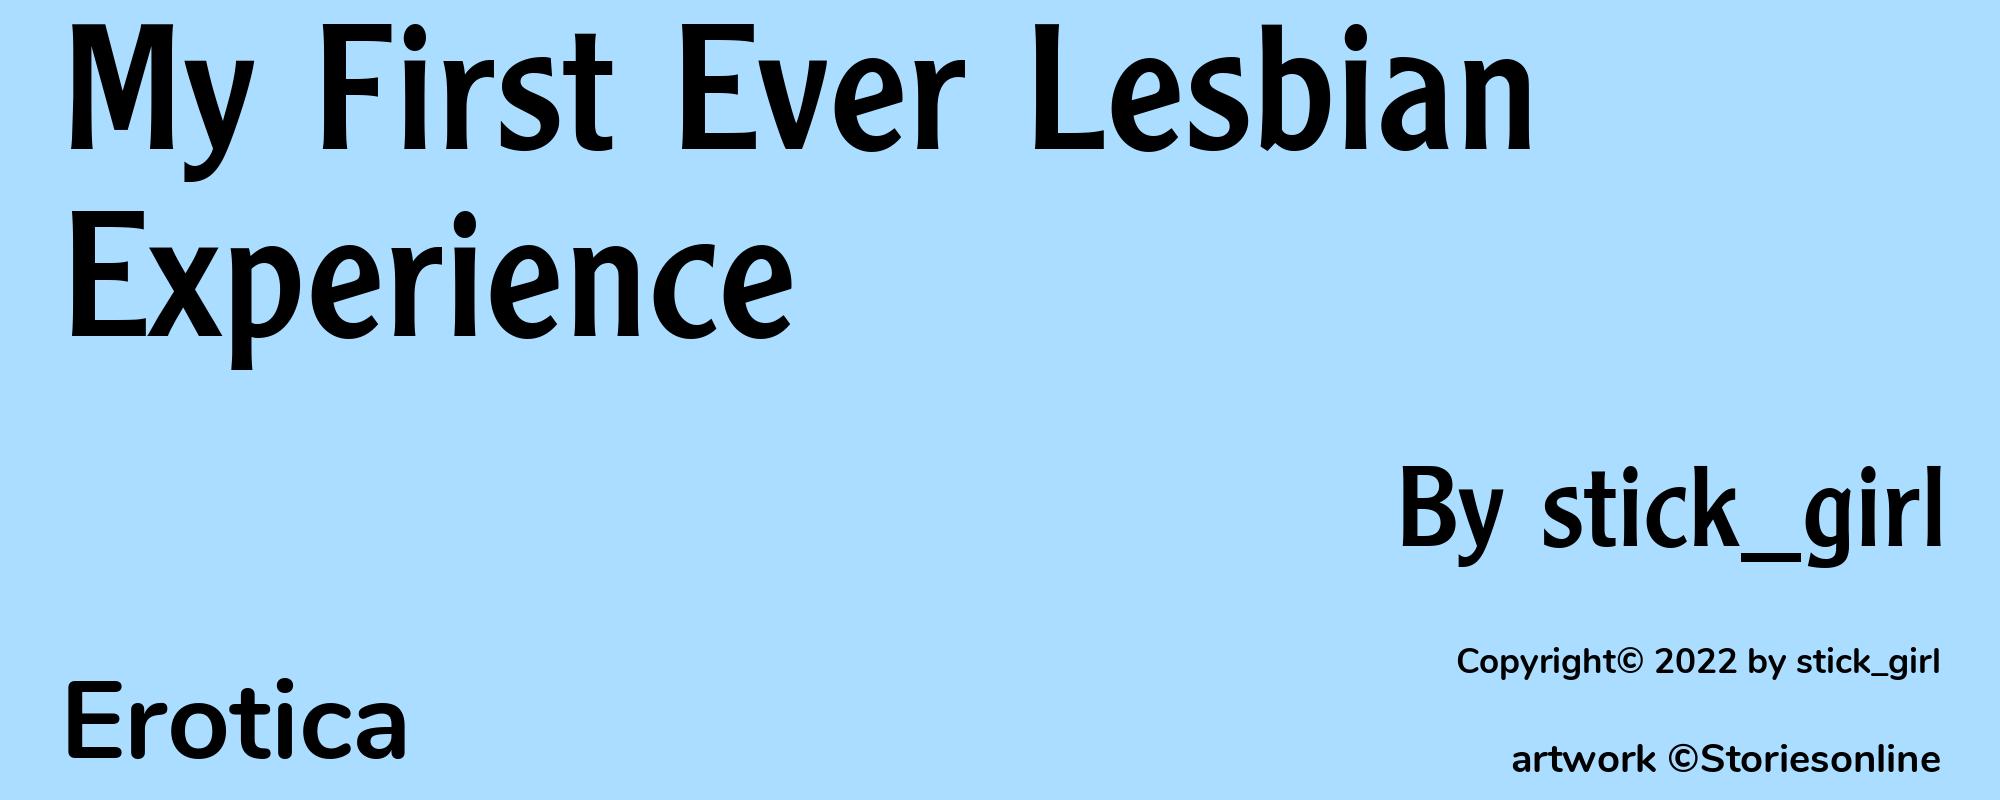 My First Ever Lesbian Experience - Cover